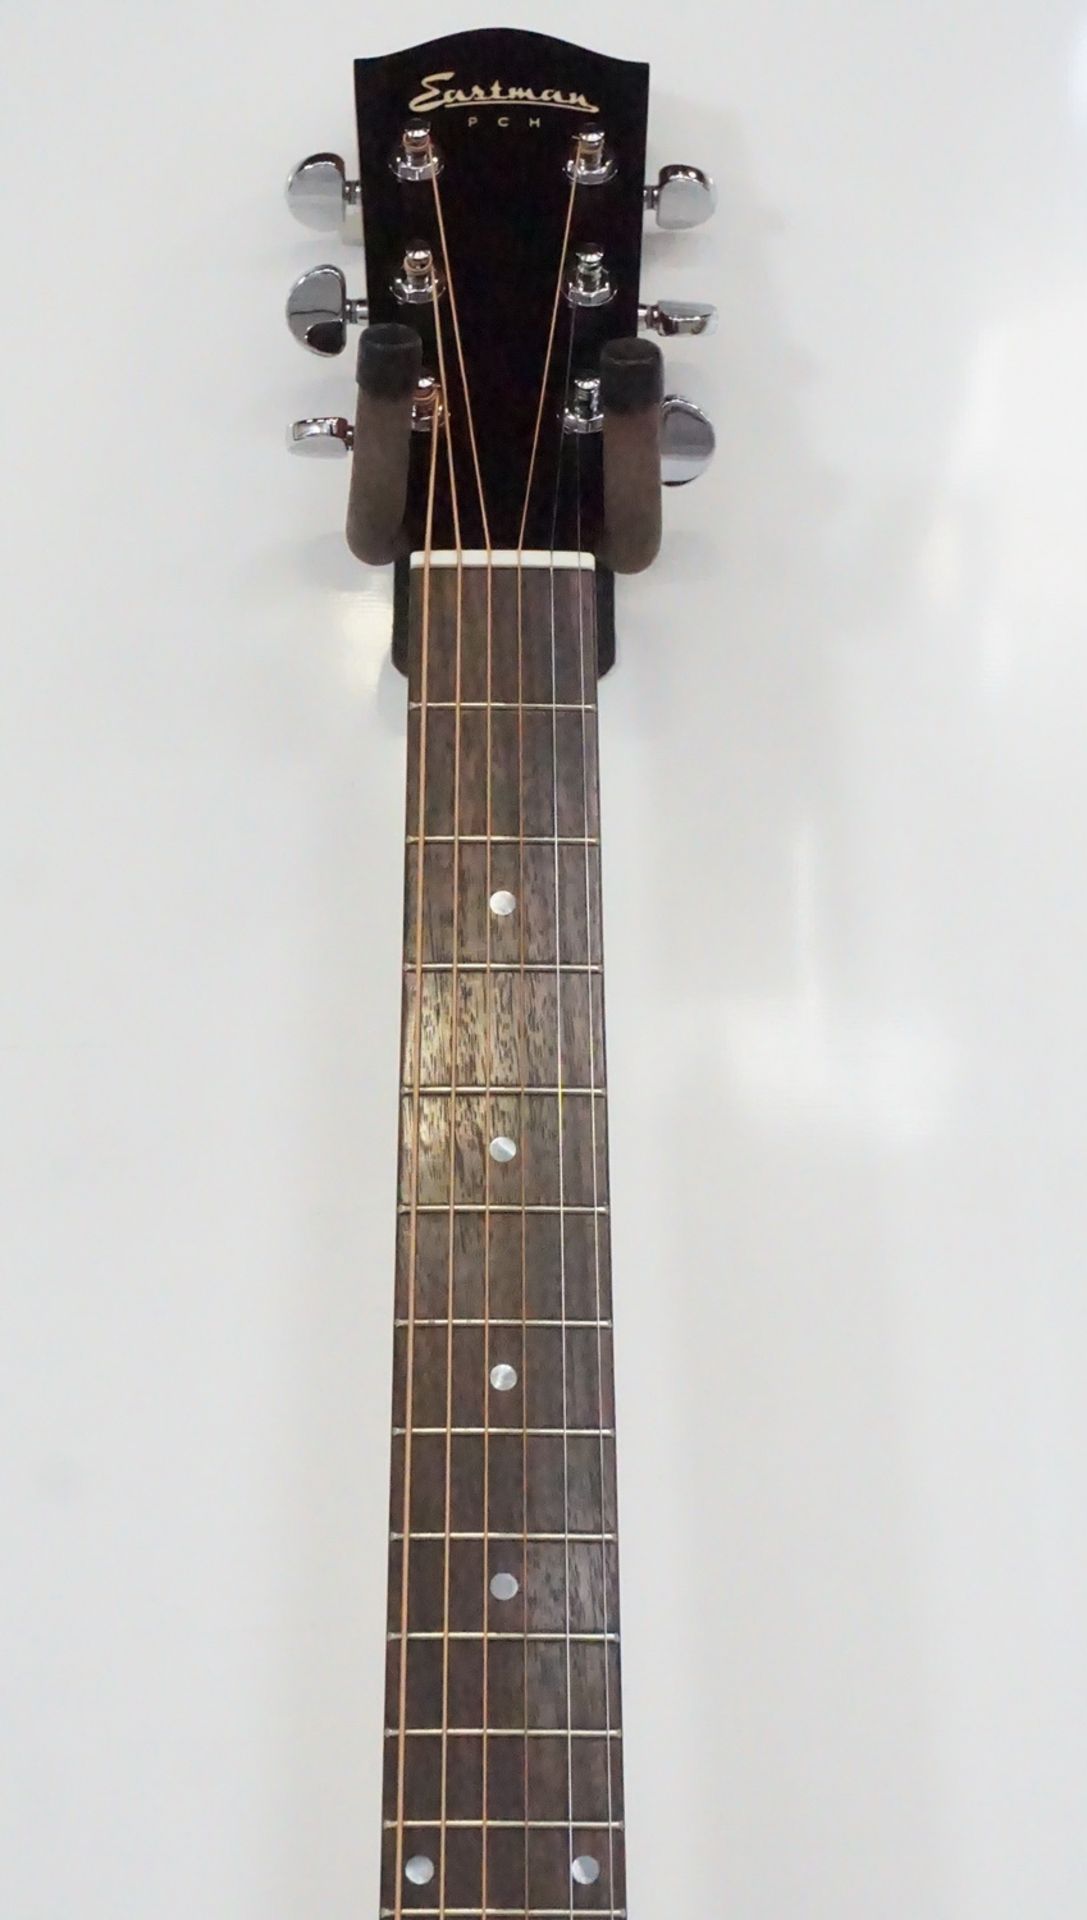 EASTMAN PCH1-0M MAHOGANY (ORCHESTRA MODEL) SOLID TIP ACOUSTIC GUITAR W/ BLACK HARDSHELL CASE - Image 3 of 4